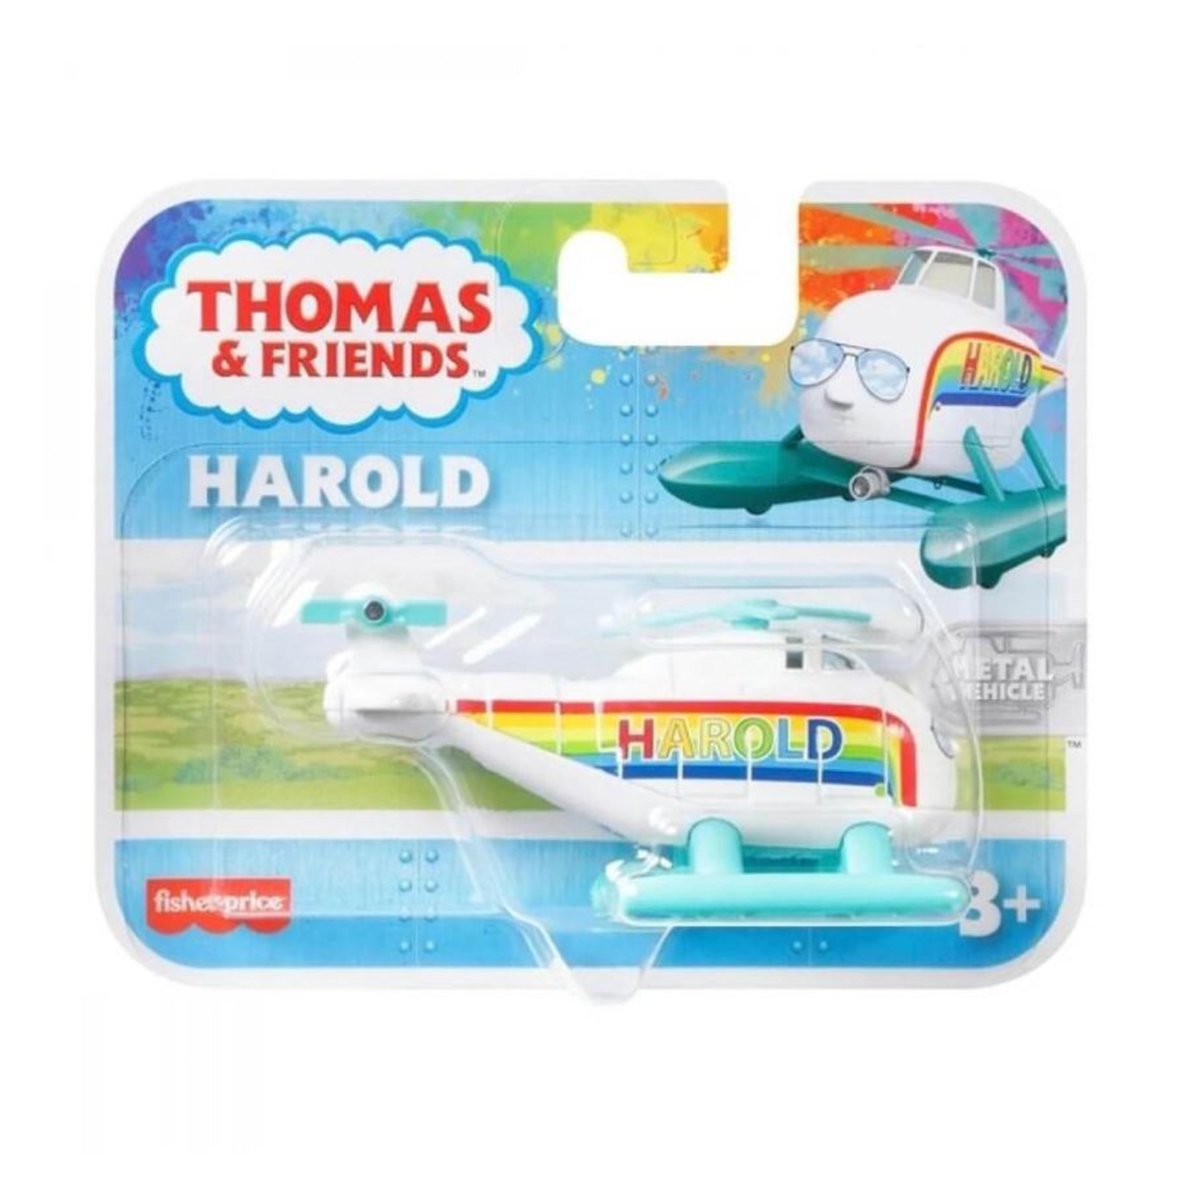 Elicopterul Harold, Thomas and Friends, GYV67 noriel.ro imagine 2022